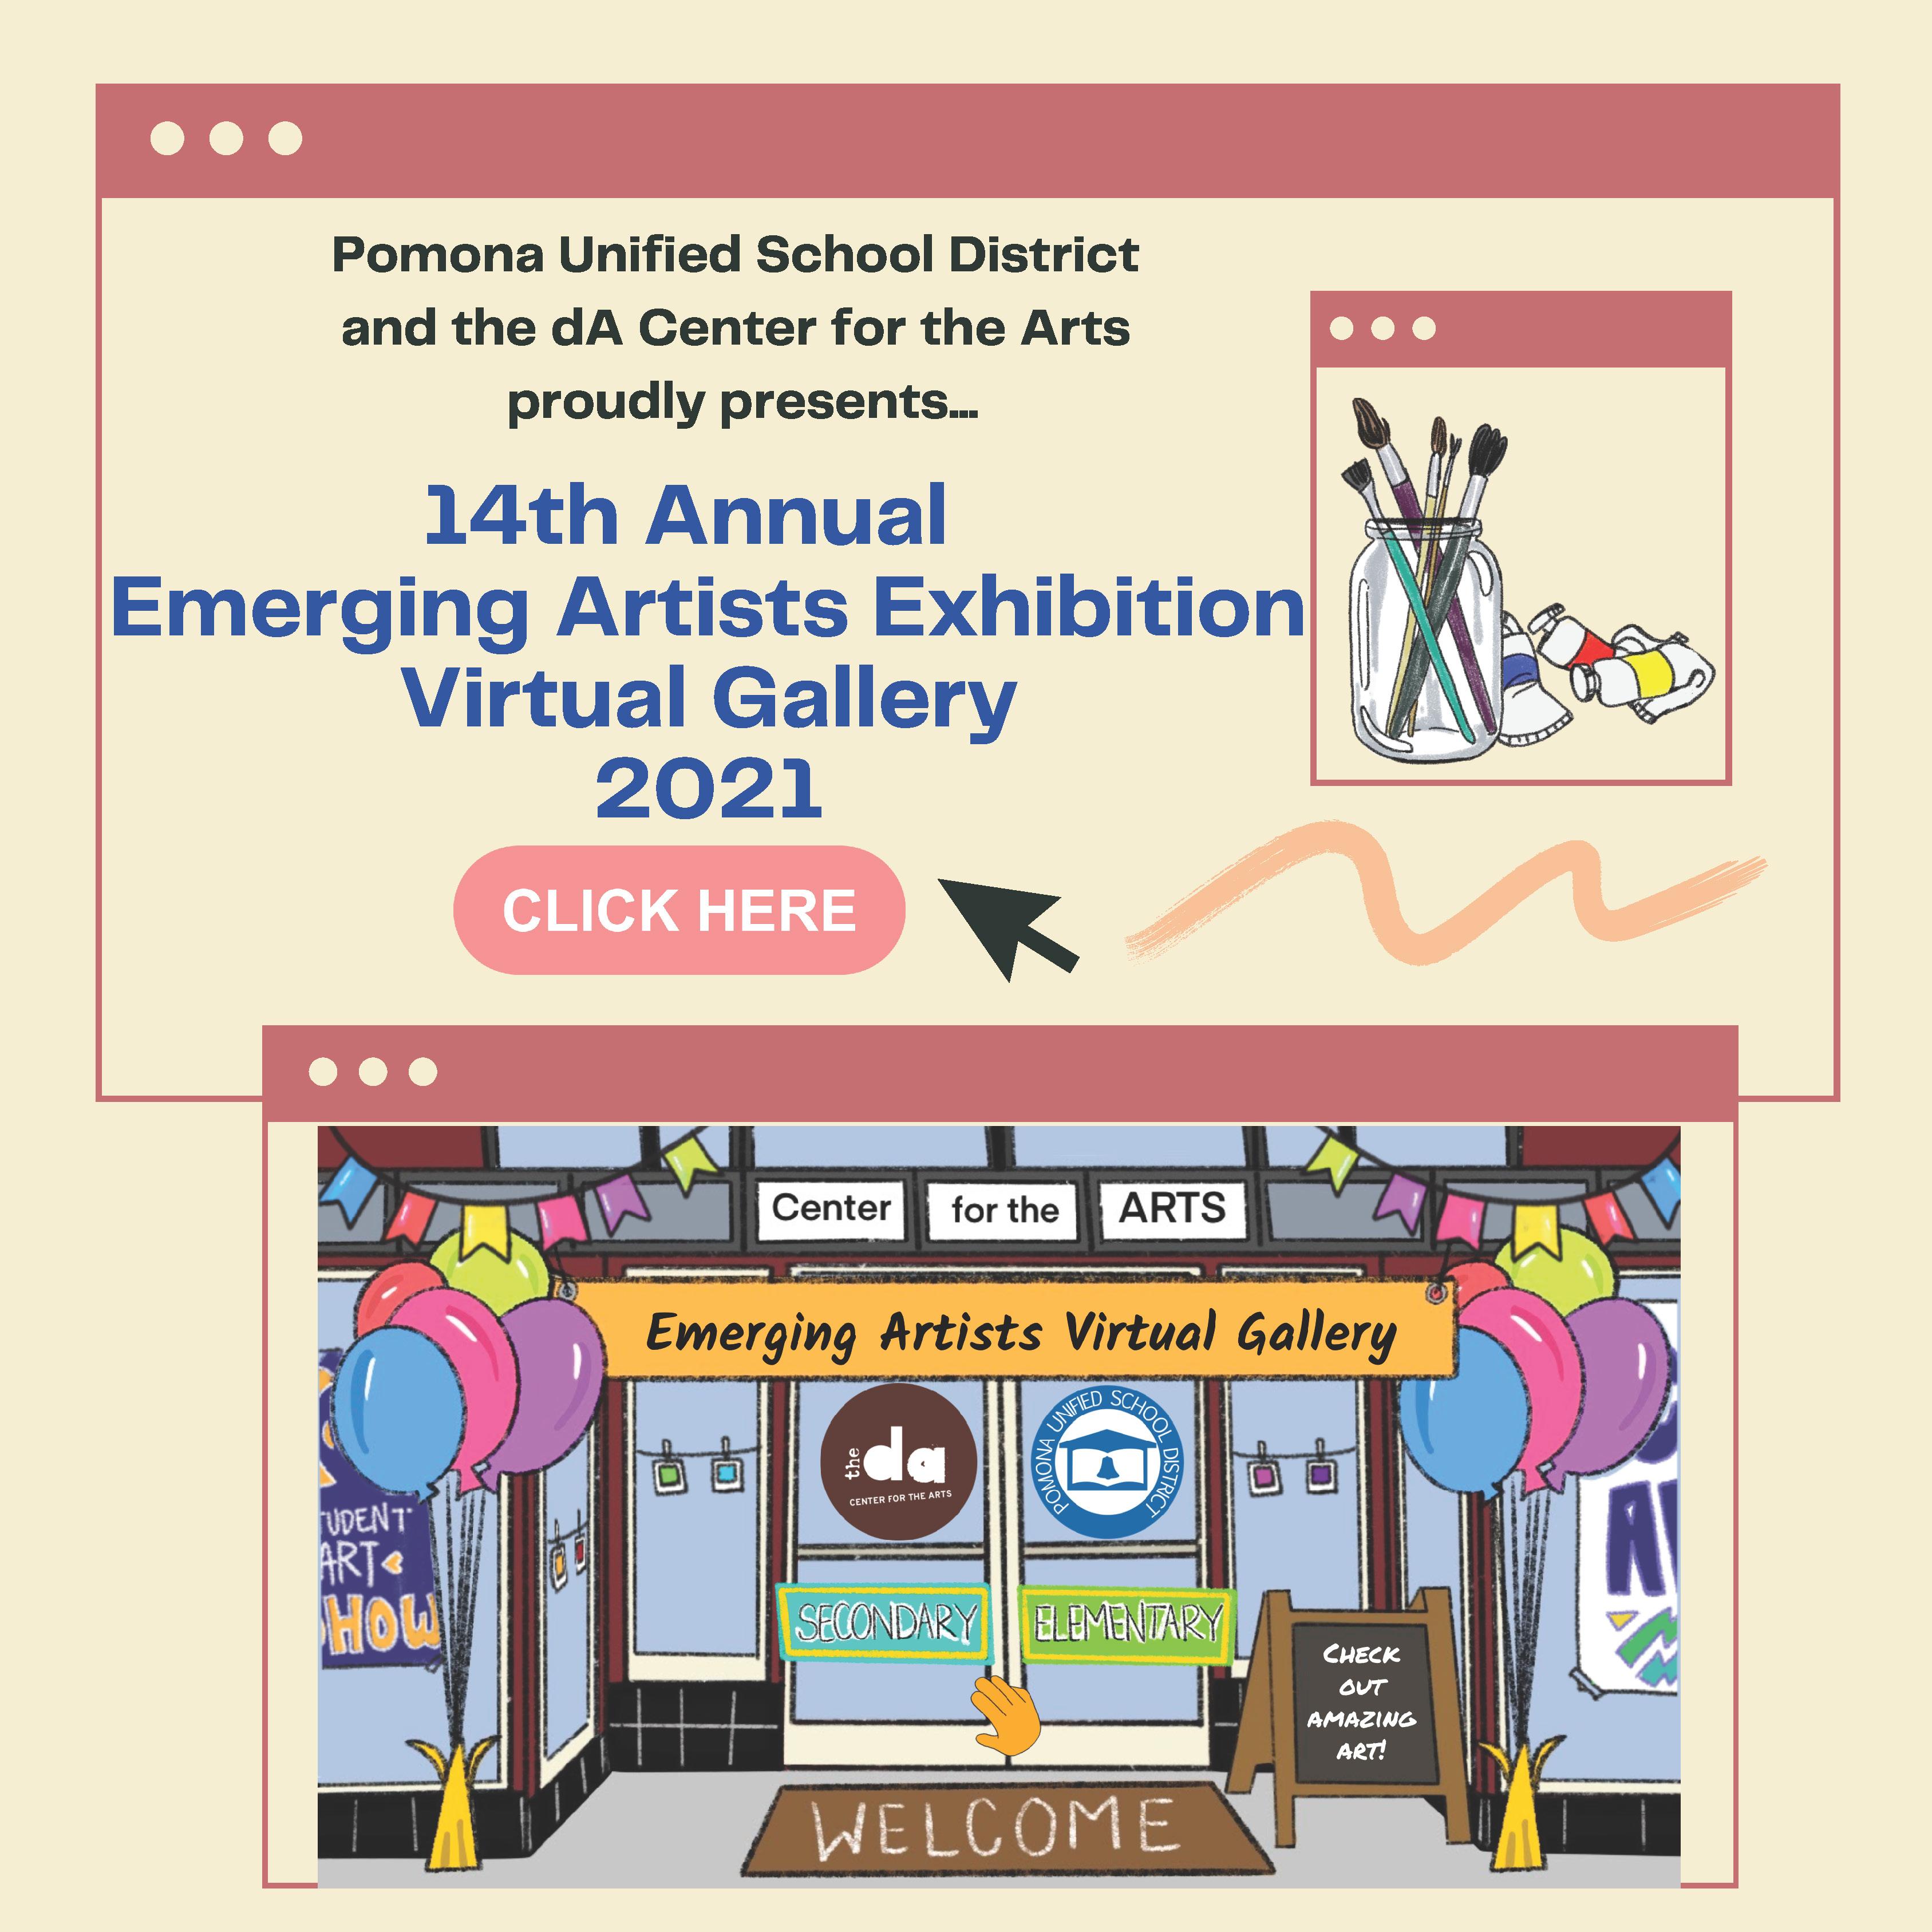 https://proudtobe.pusd.org/apps/pages/EmergingArtists